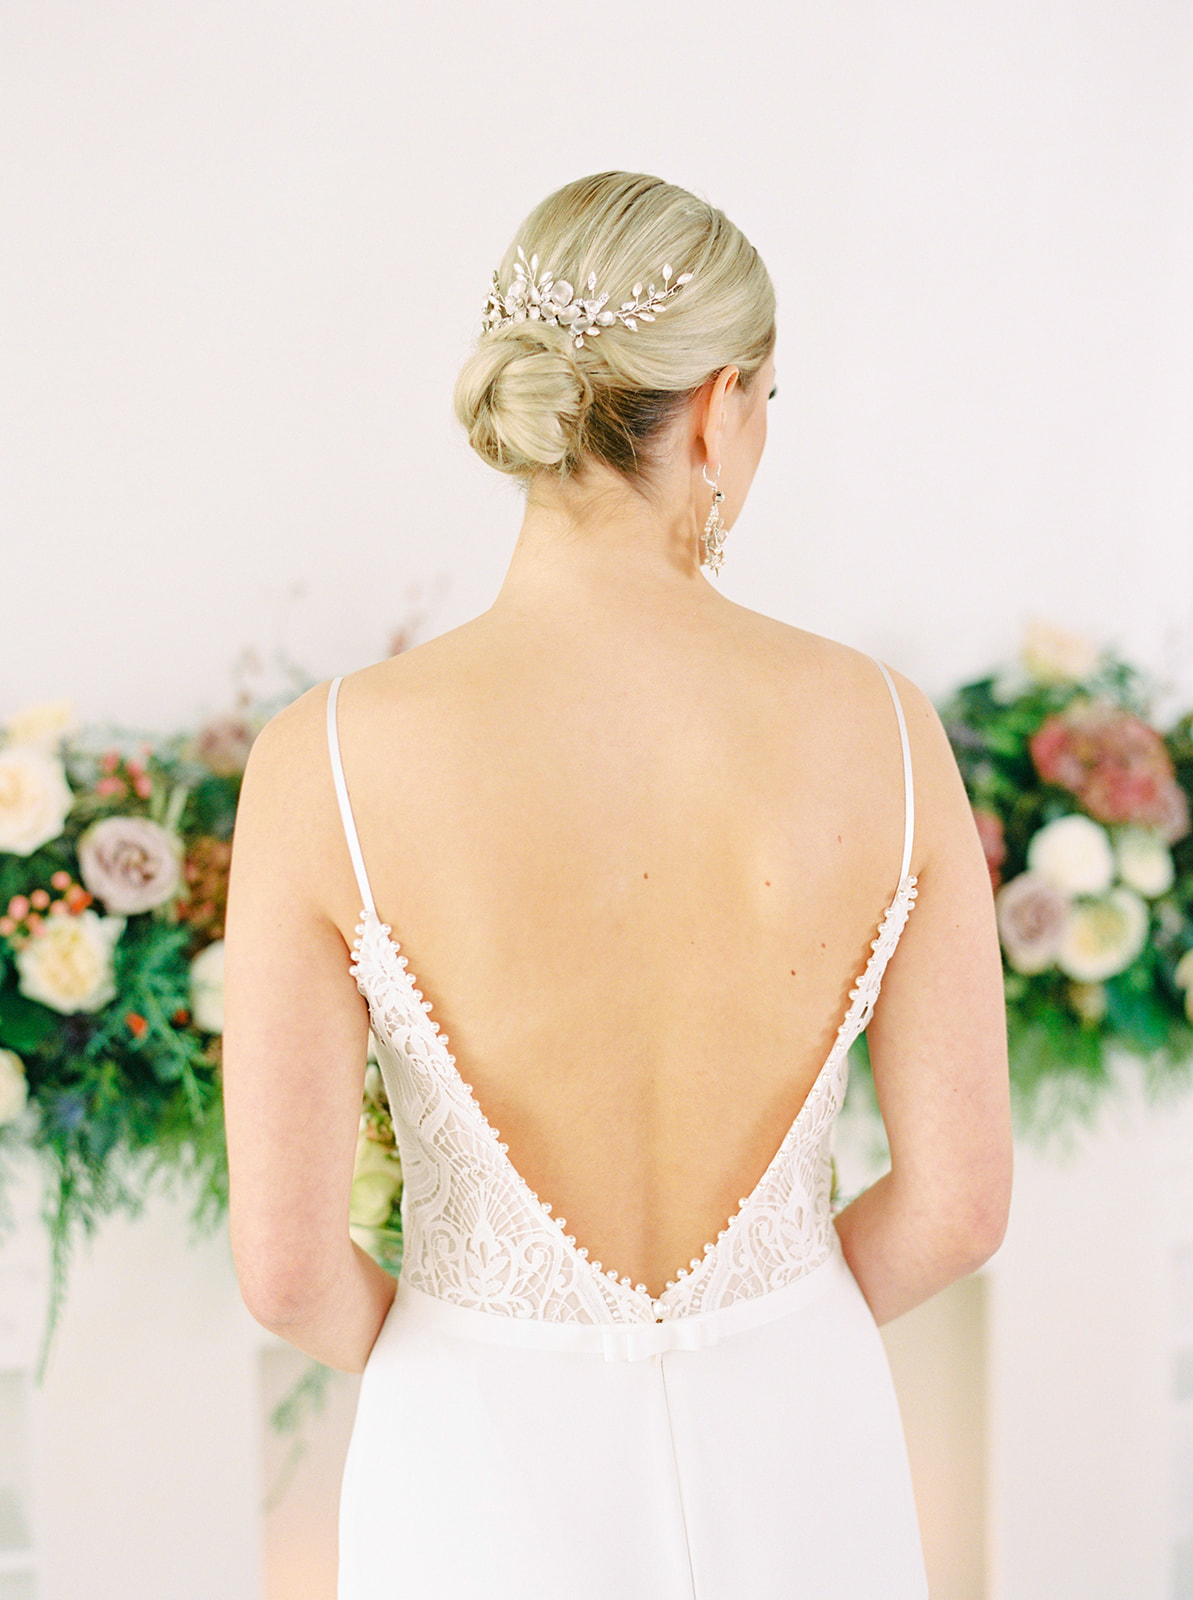 Lace and pearl open back wedding gown for the elegant bride